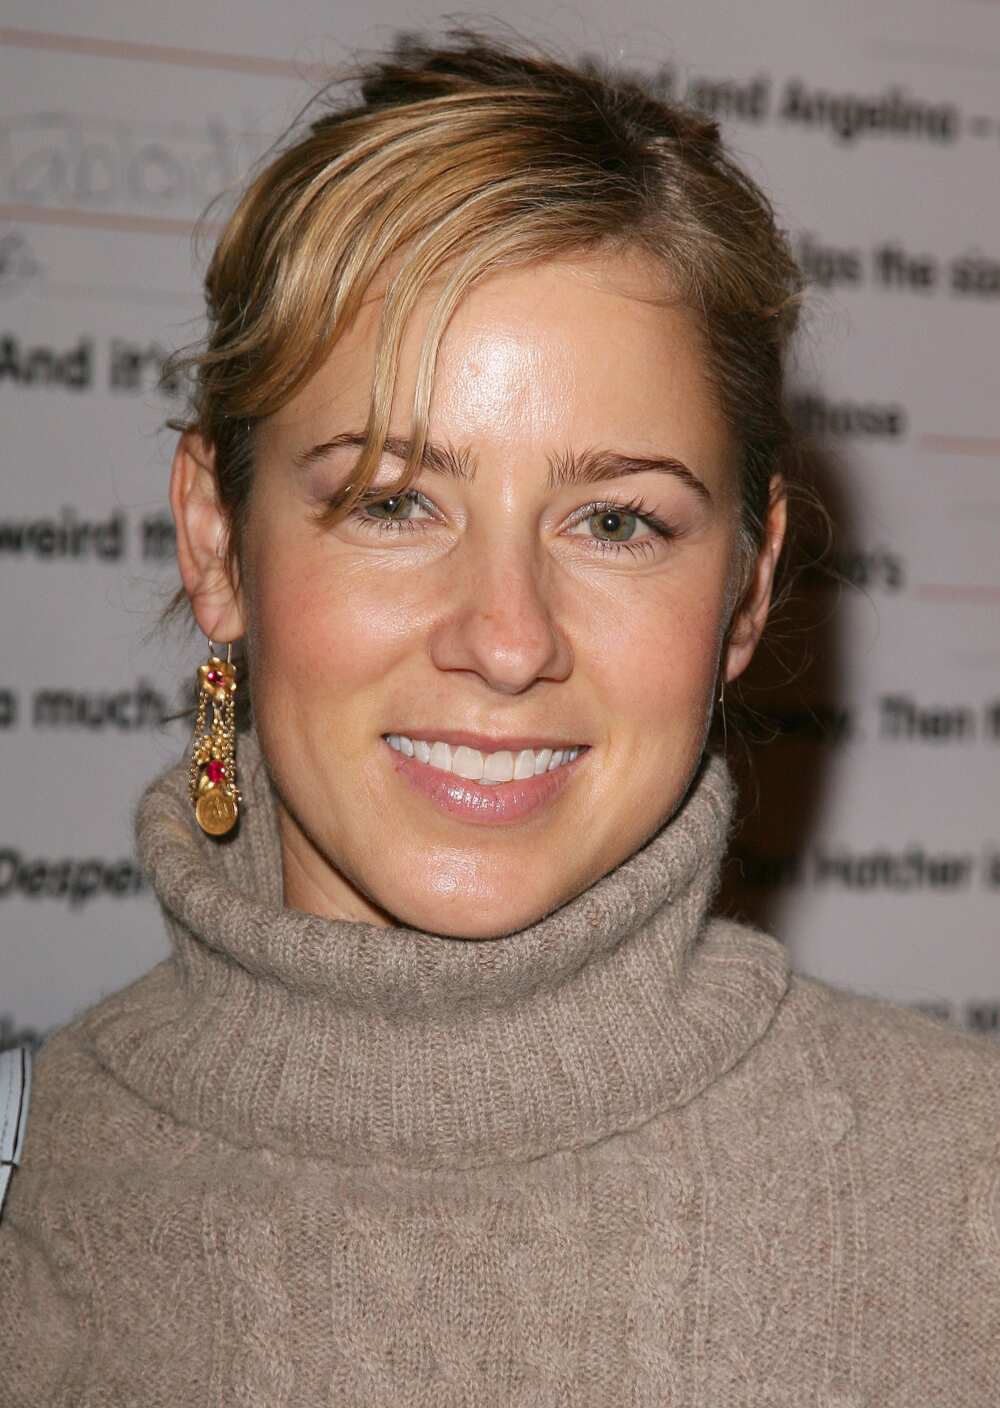 what happened to traylor howard